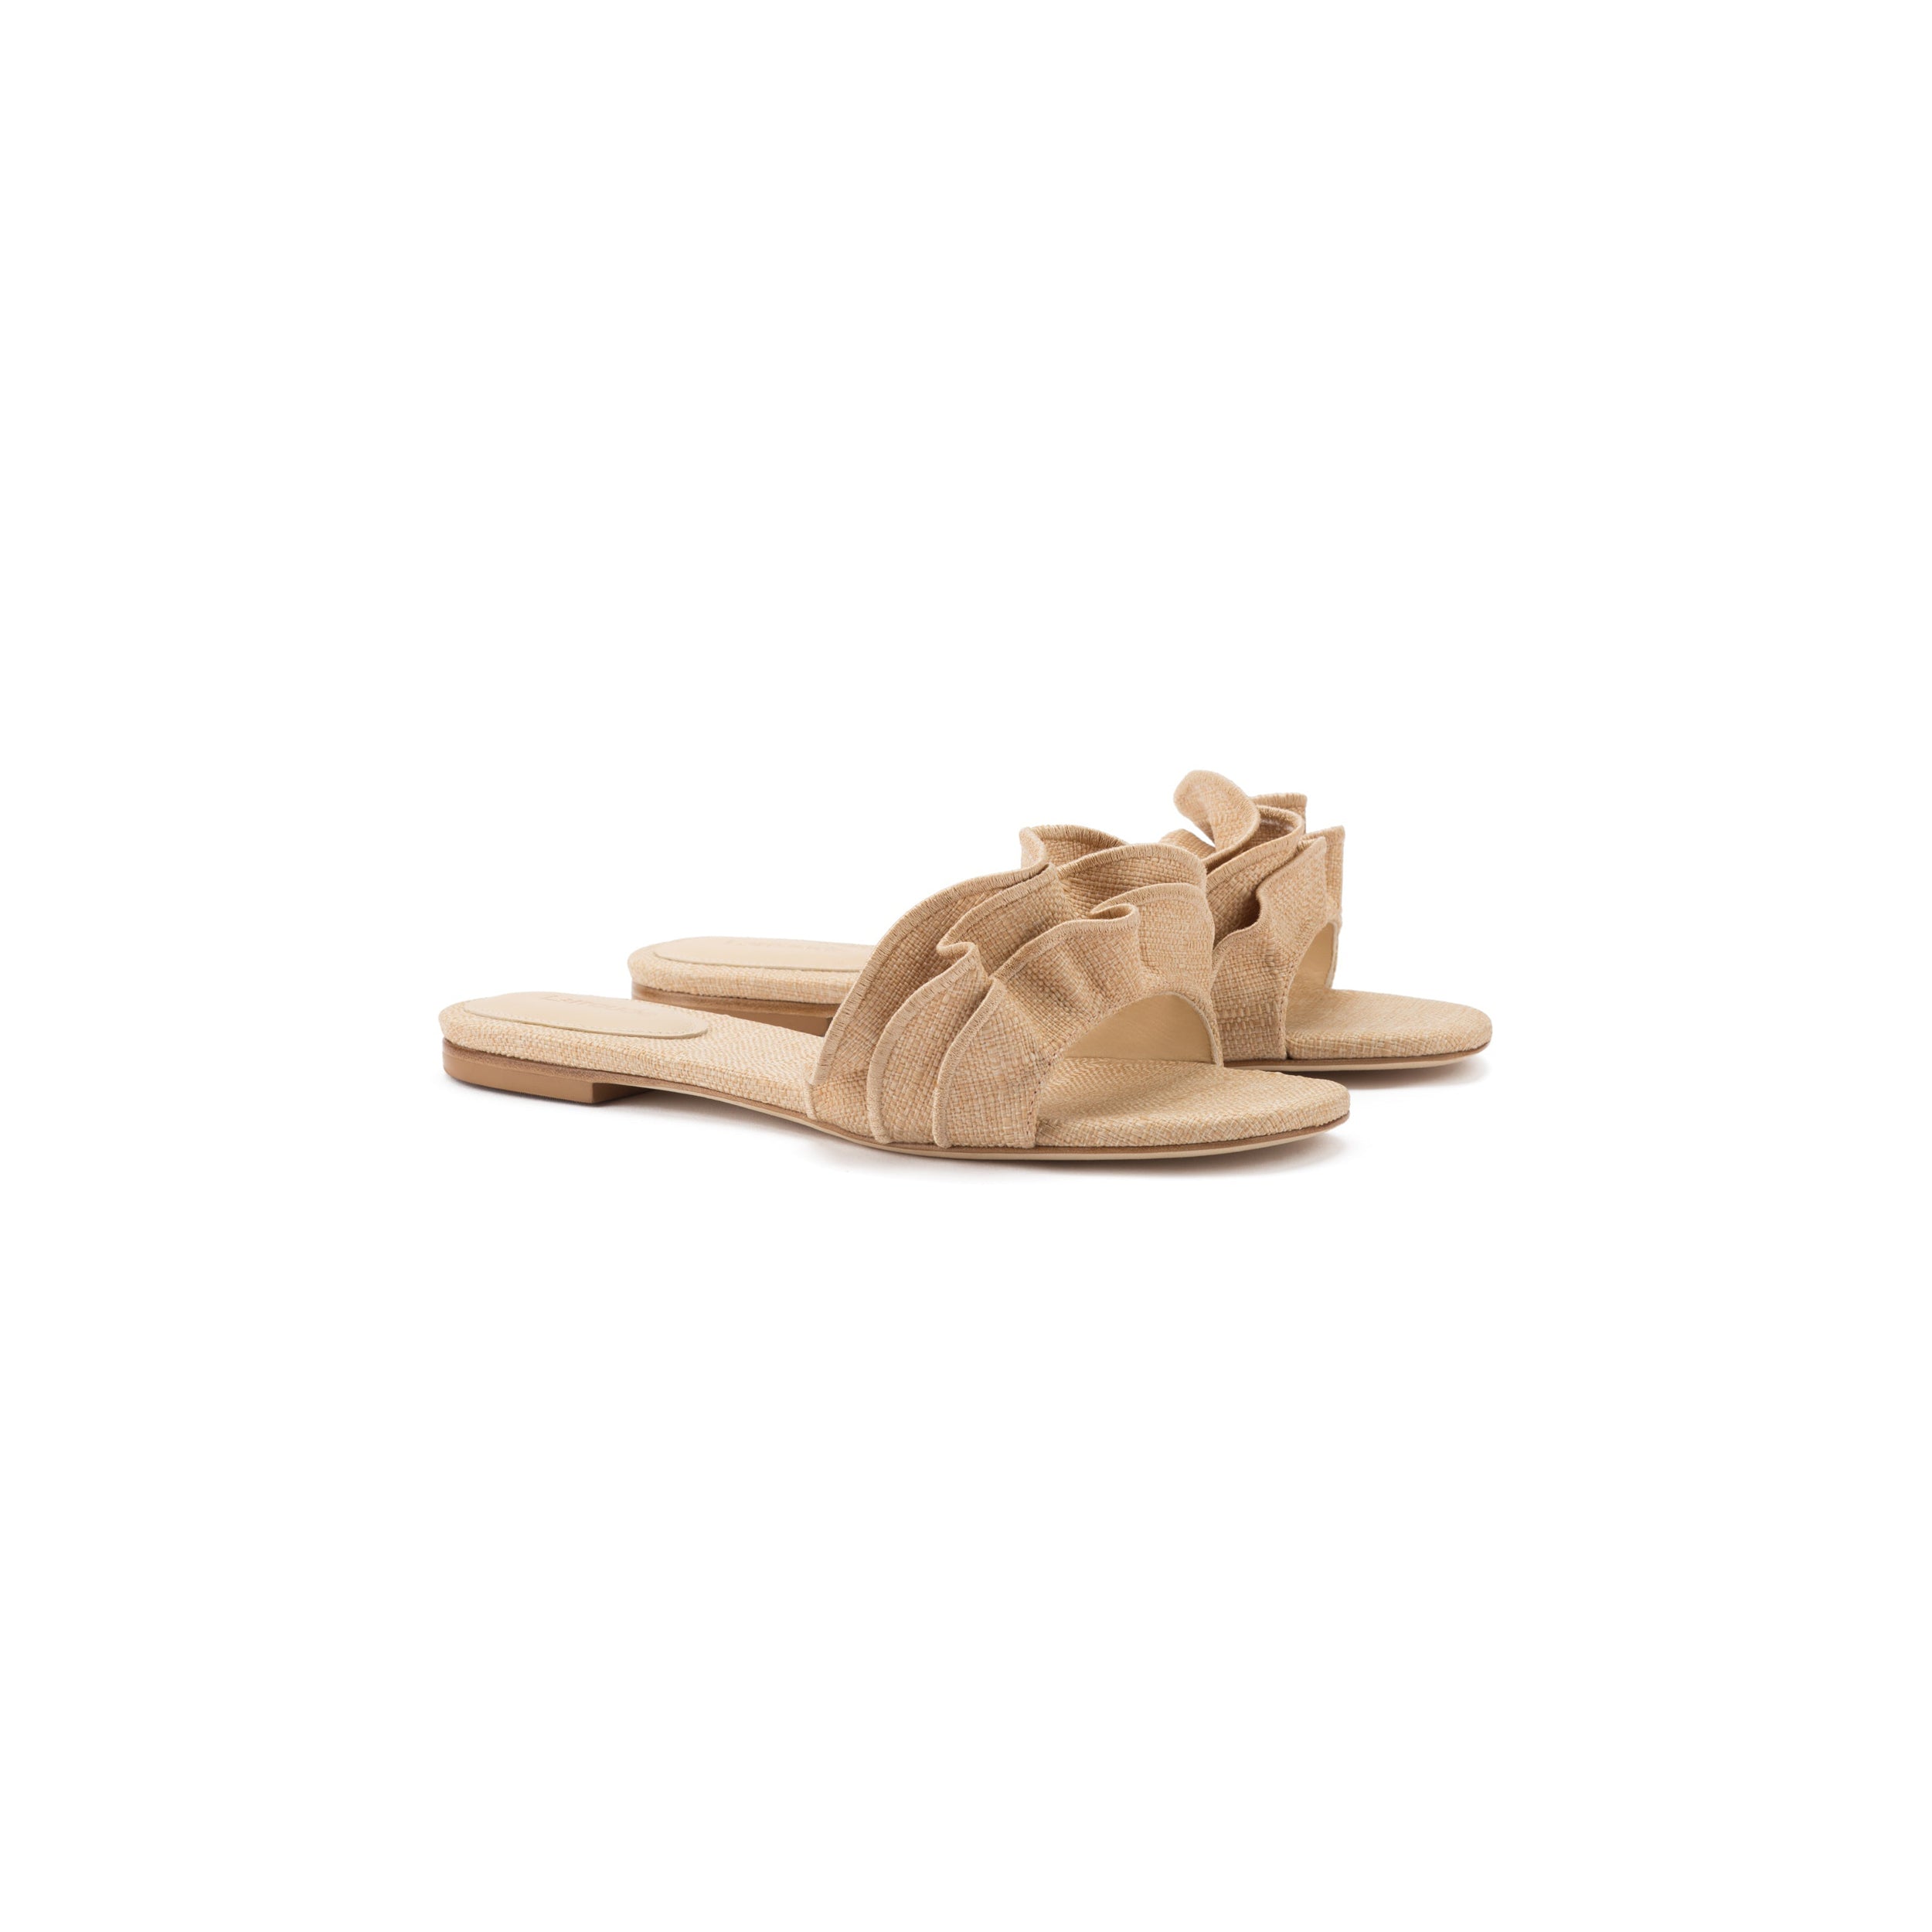 The Ivy Ruffle Flat Mule in Beige Raffia is a pair of flat sandals featuring fabric bow details on the straps, set against a white background. With their casual, summery design and open toes, these bestselling slides boast a simple sole ideal for warm days.